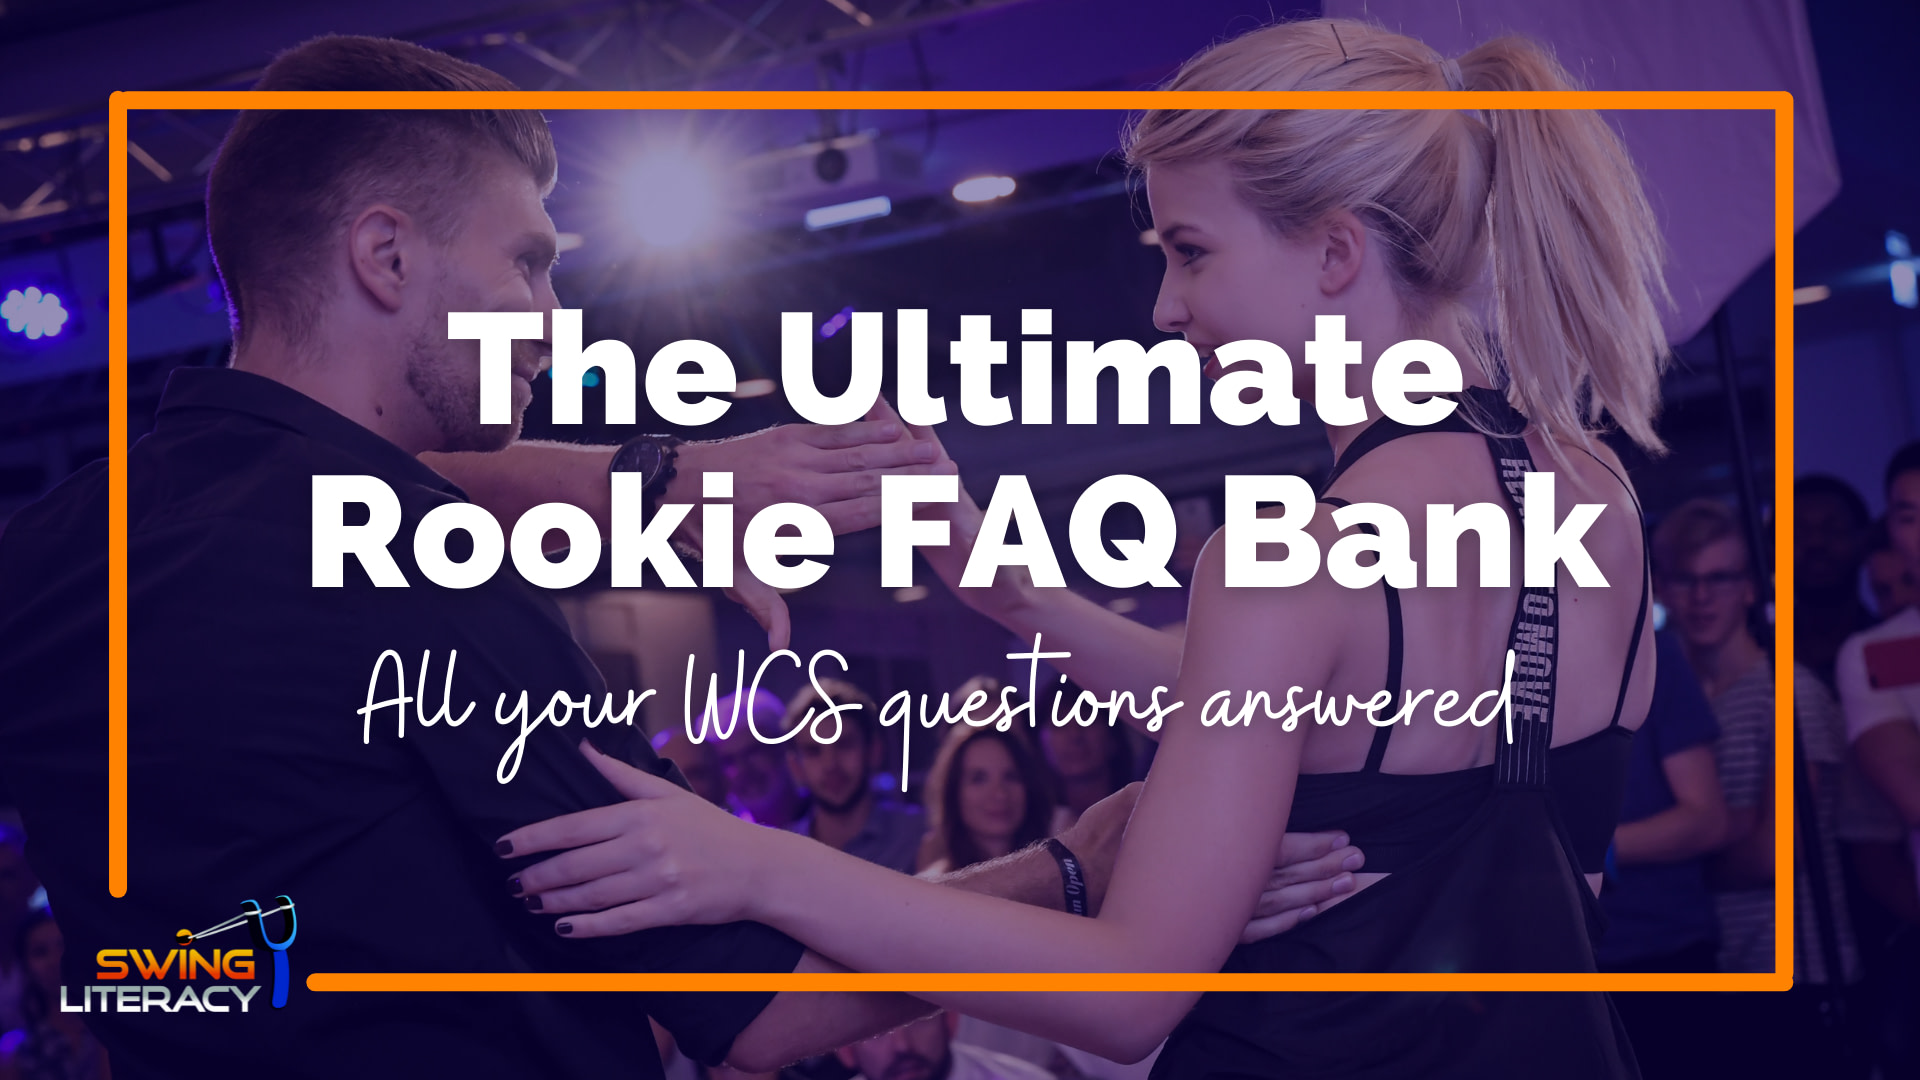 The Ultimate Rookie FAQ Bank